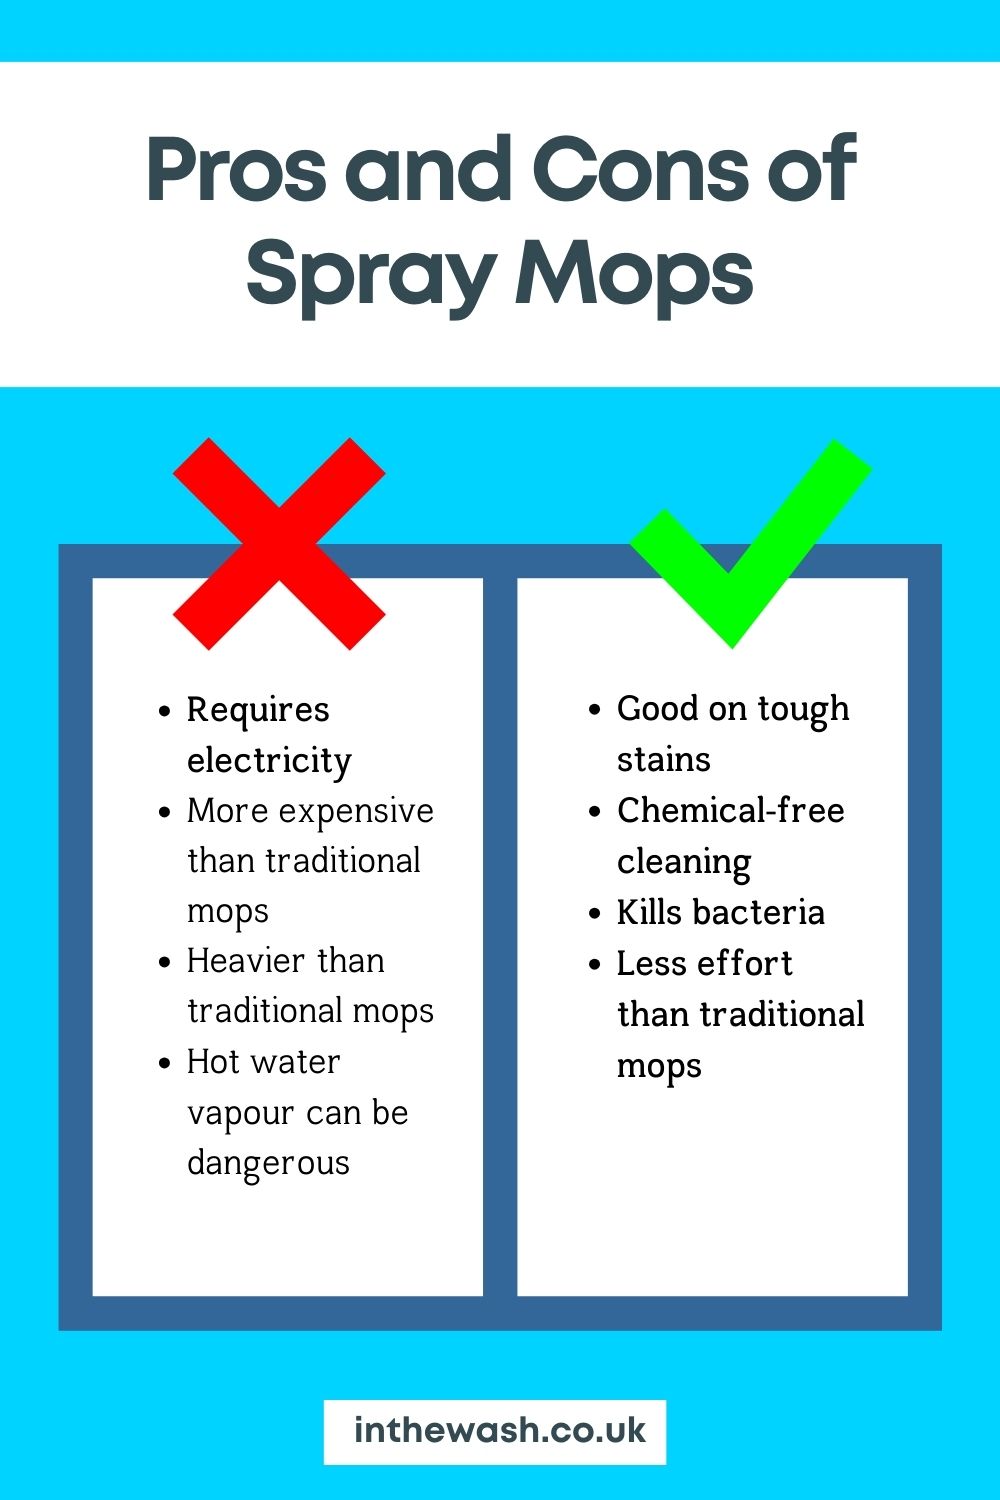 Pros and cons of spray mops